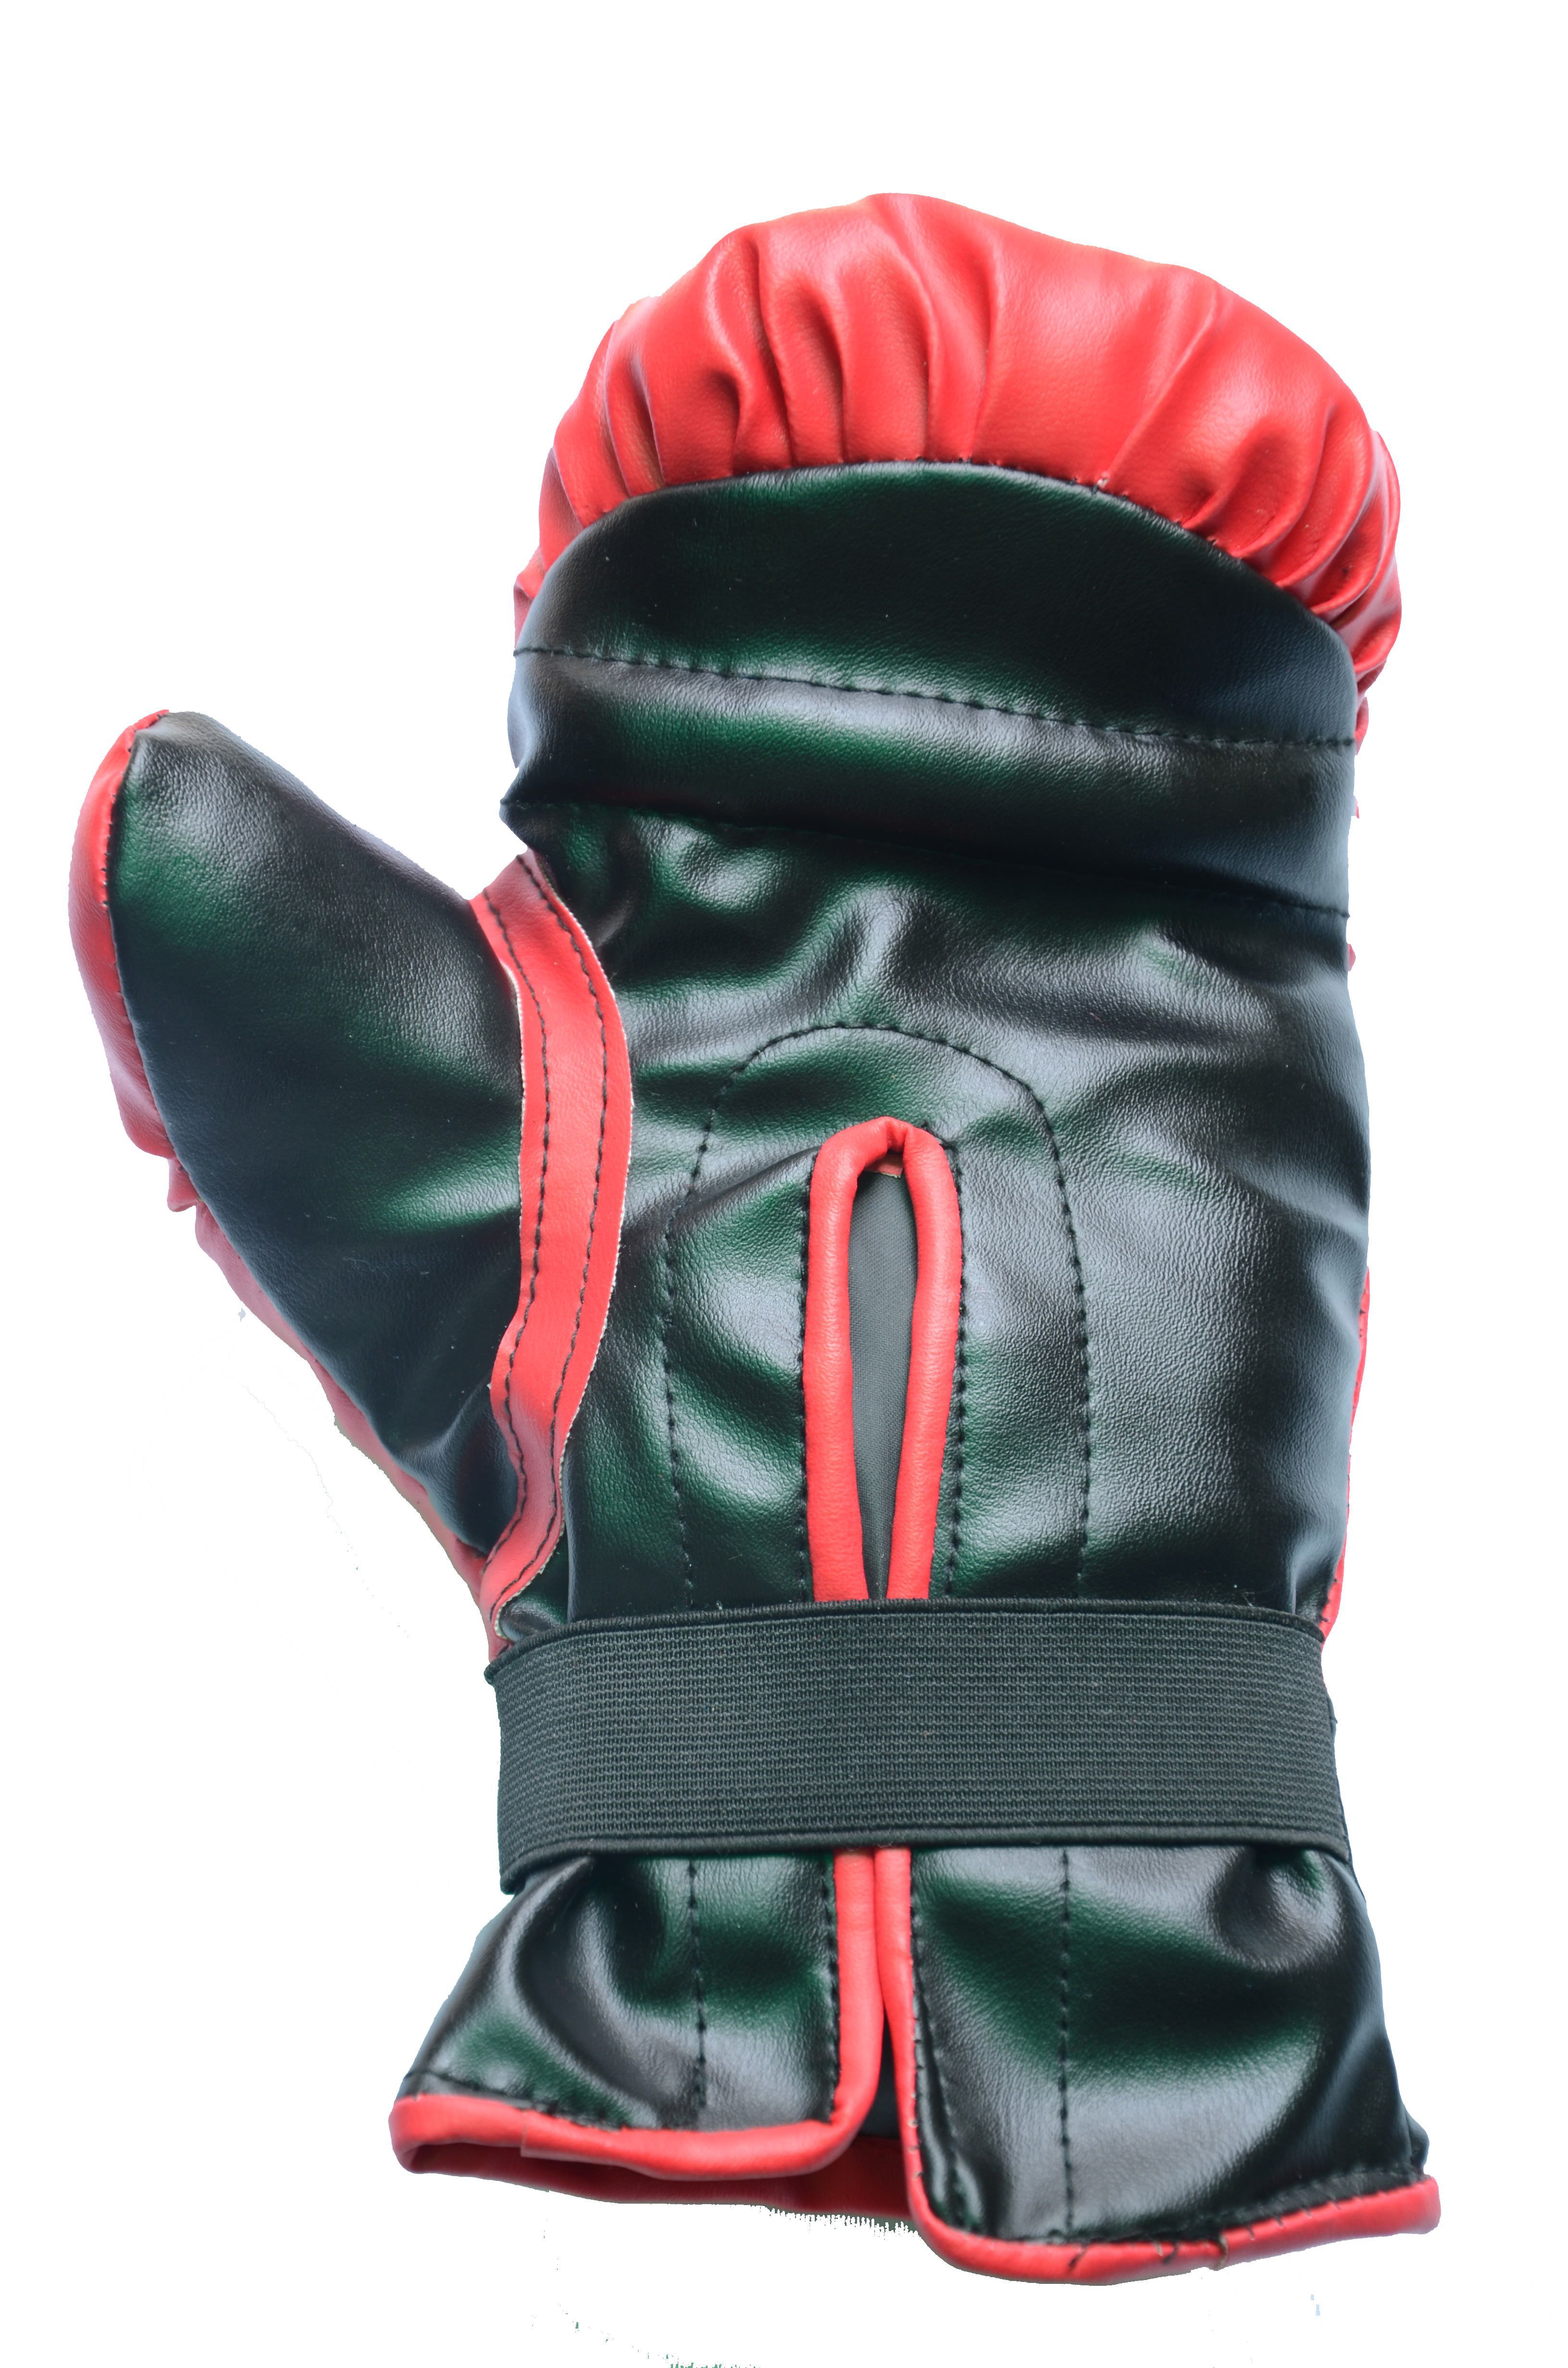 BOXING KIT: Buy Online at Best Price on Snapdeal